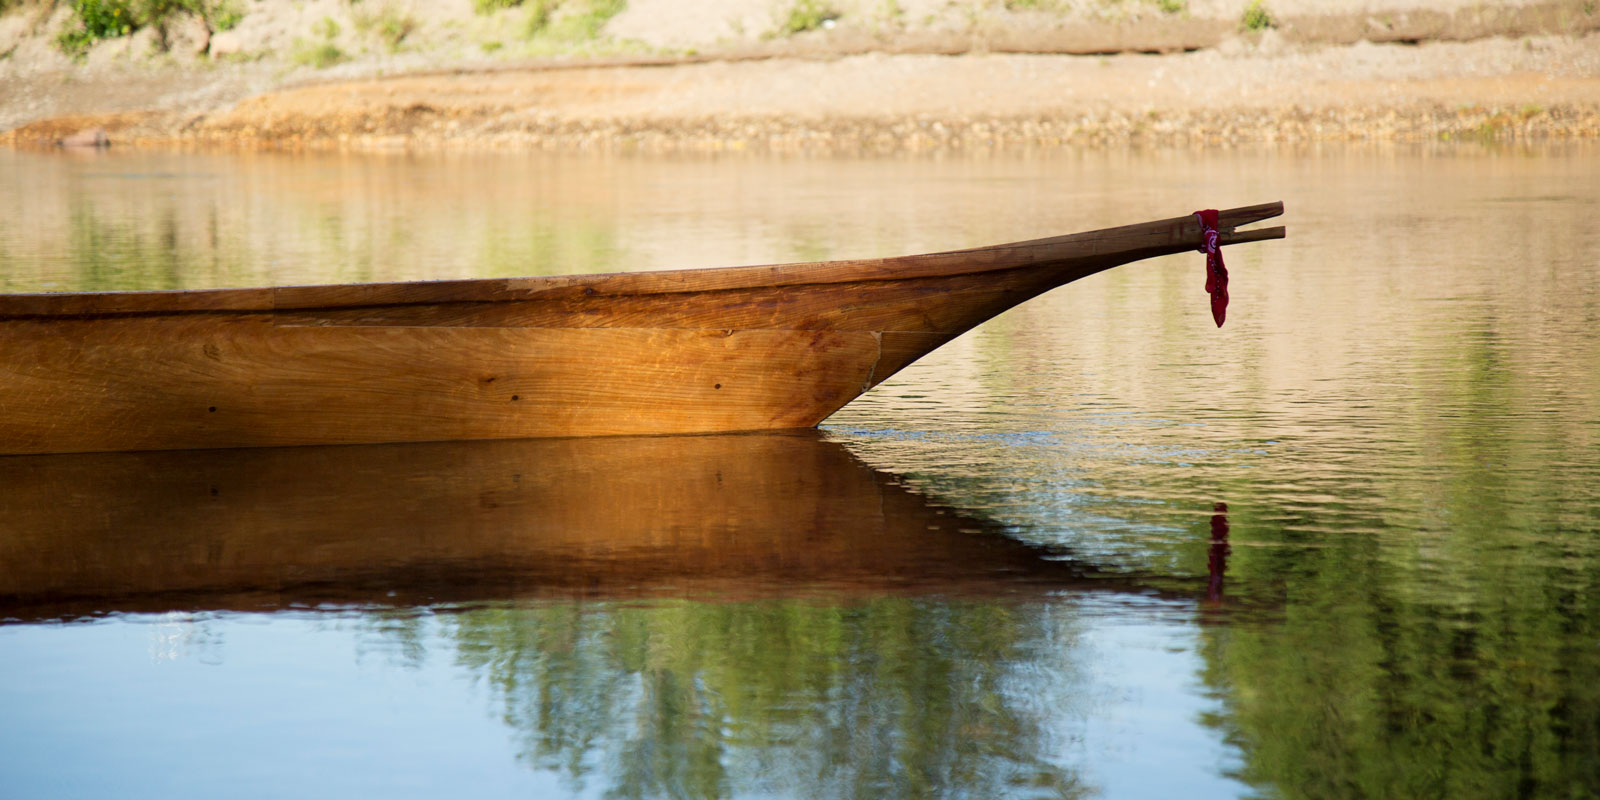 close up of the canoe with a bandana tied around its bow